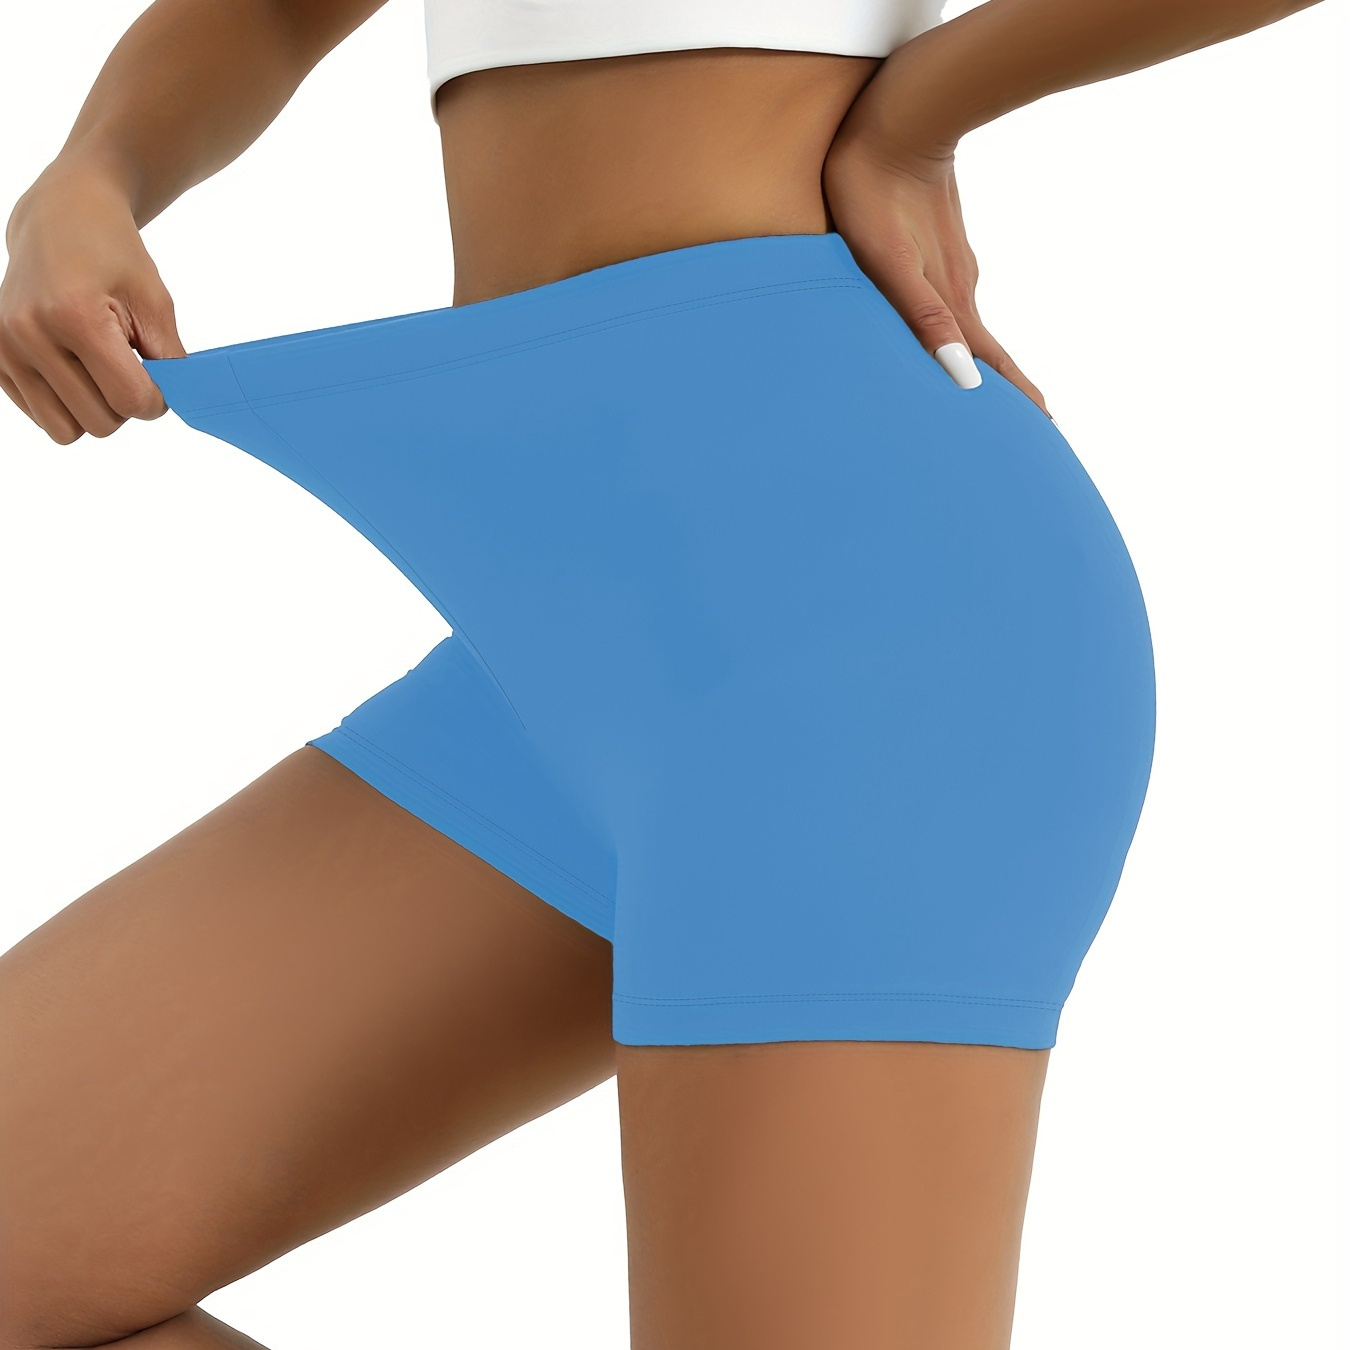 

High Waisted Biker Shorts For Women, Super Soft No See Through Workout Yoga Running Outdoors Athletic Shorts